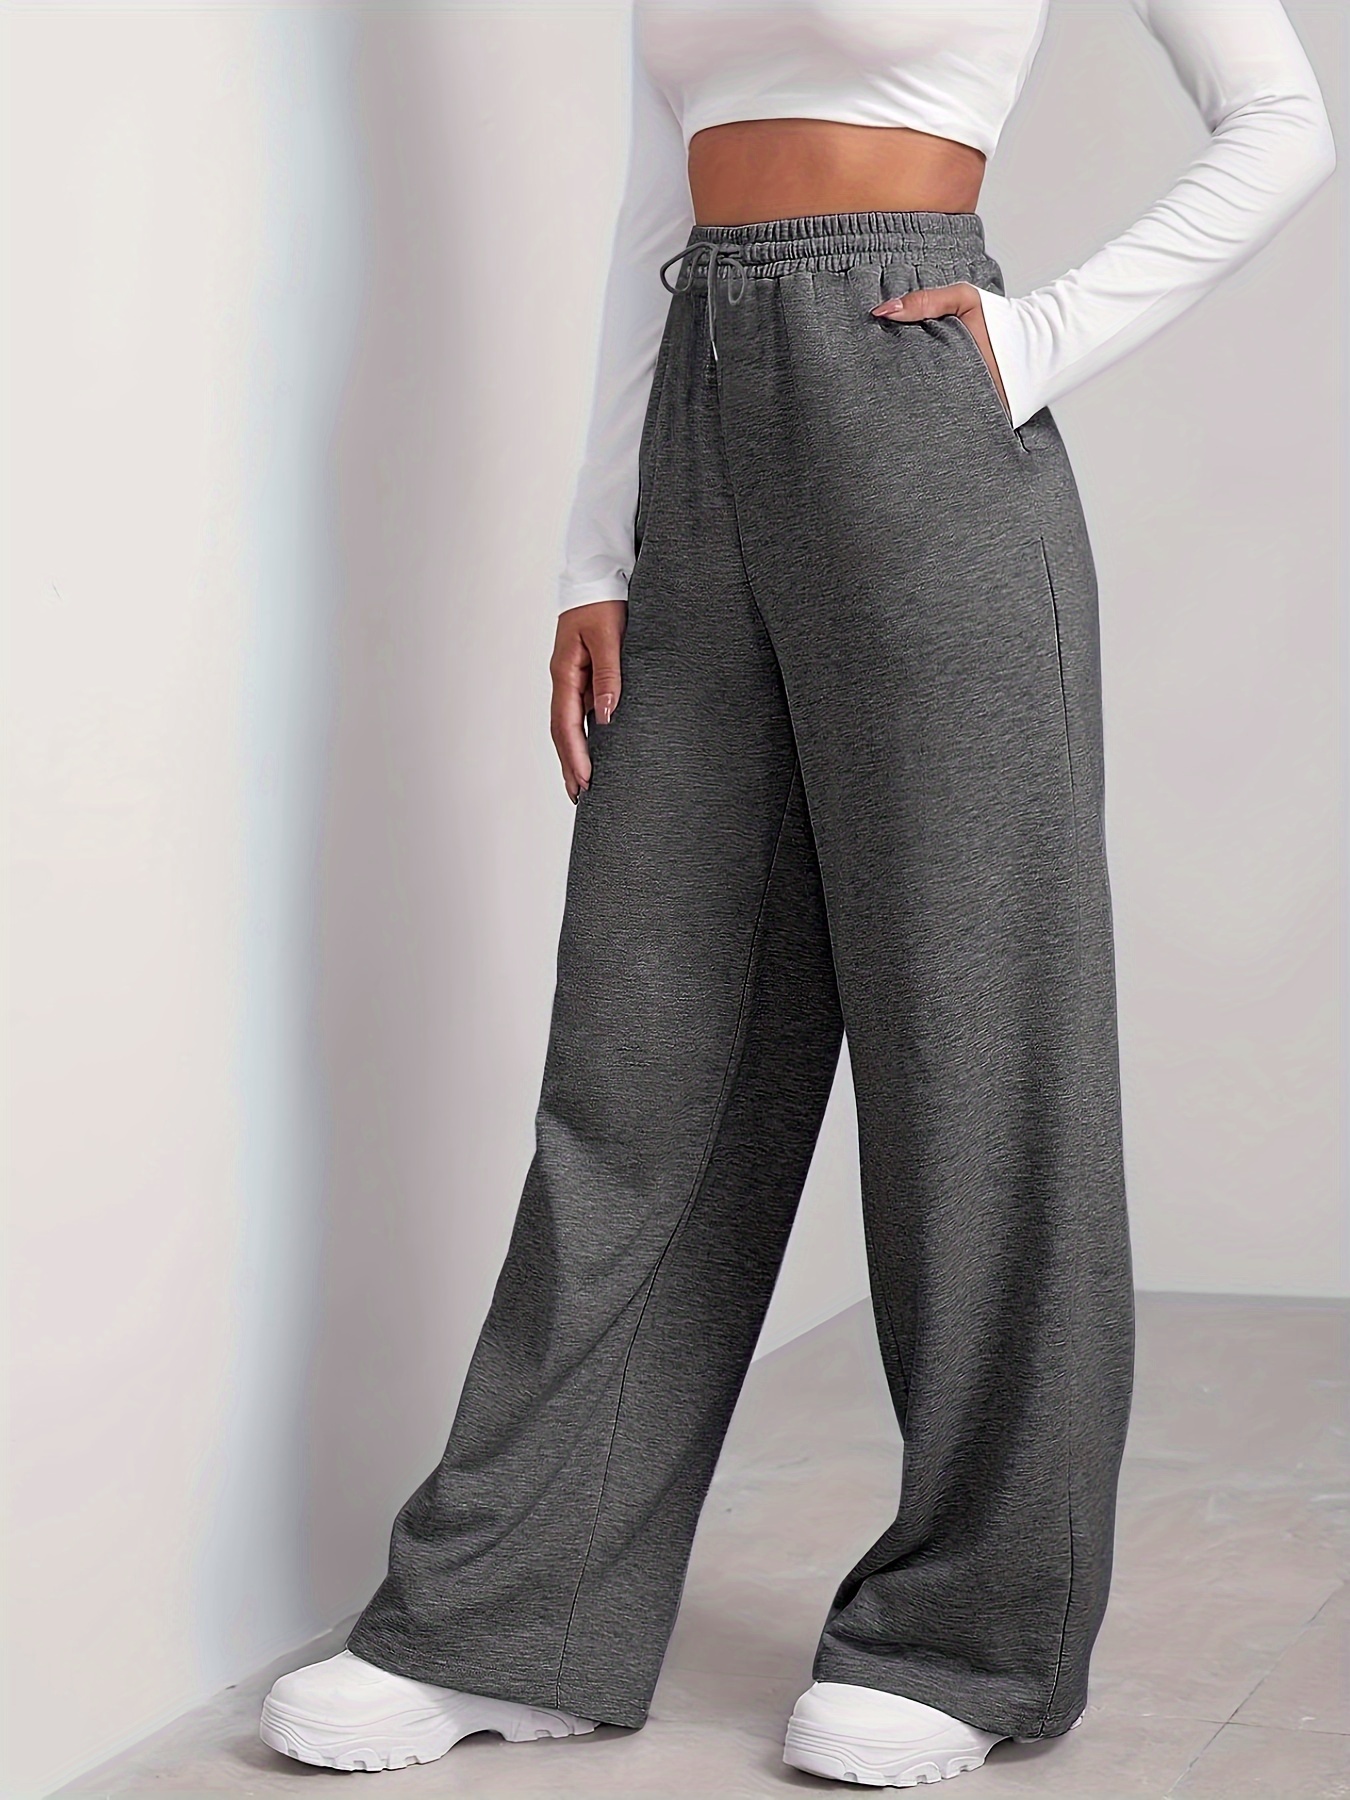 Womens Designer Flared Petite Sweatpants With Letter Print And Loose Fit  Drawstring From Bosslala, $12.48